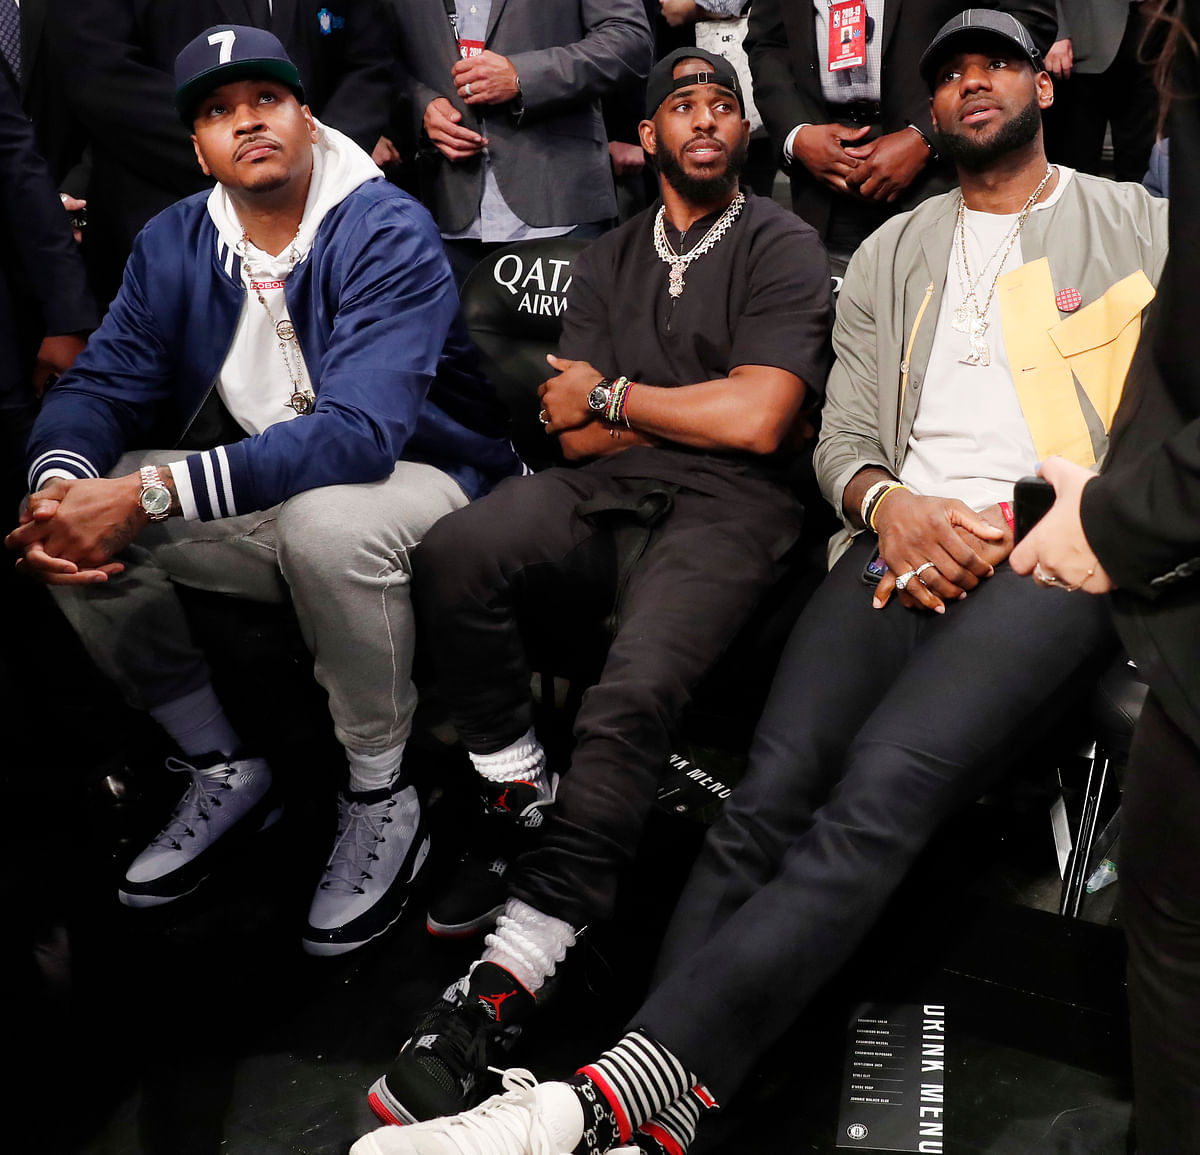 LeBron James, Chris Paul and Carmelo Anthony were all sitting courtside for Dwayne Wade’s farewell game.